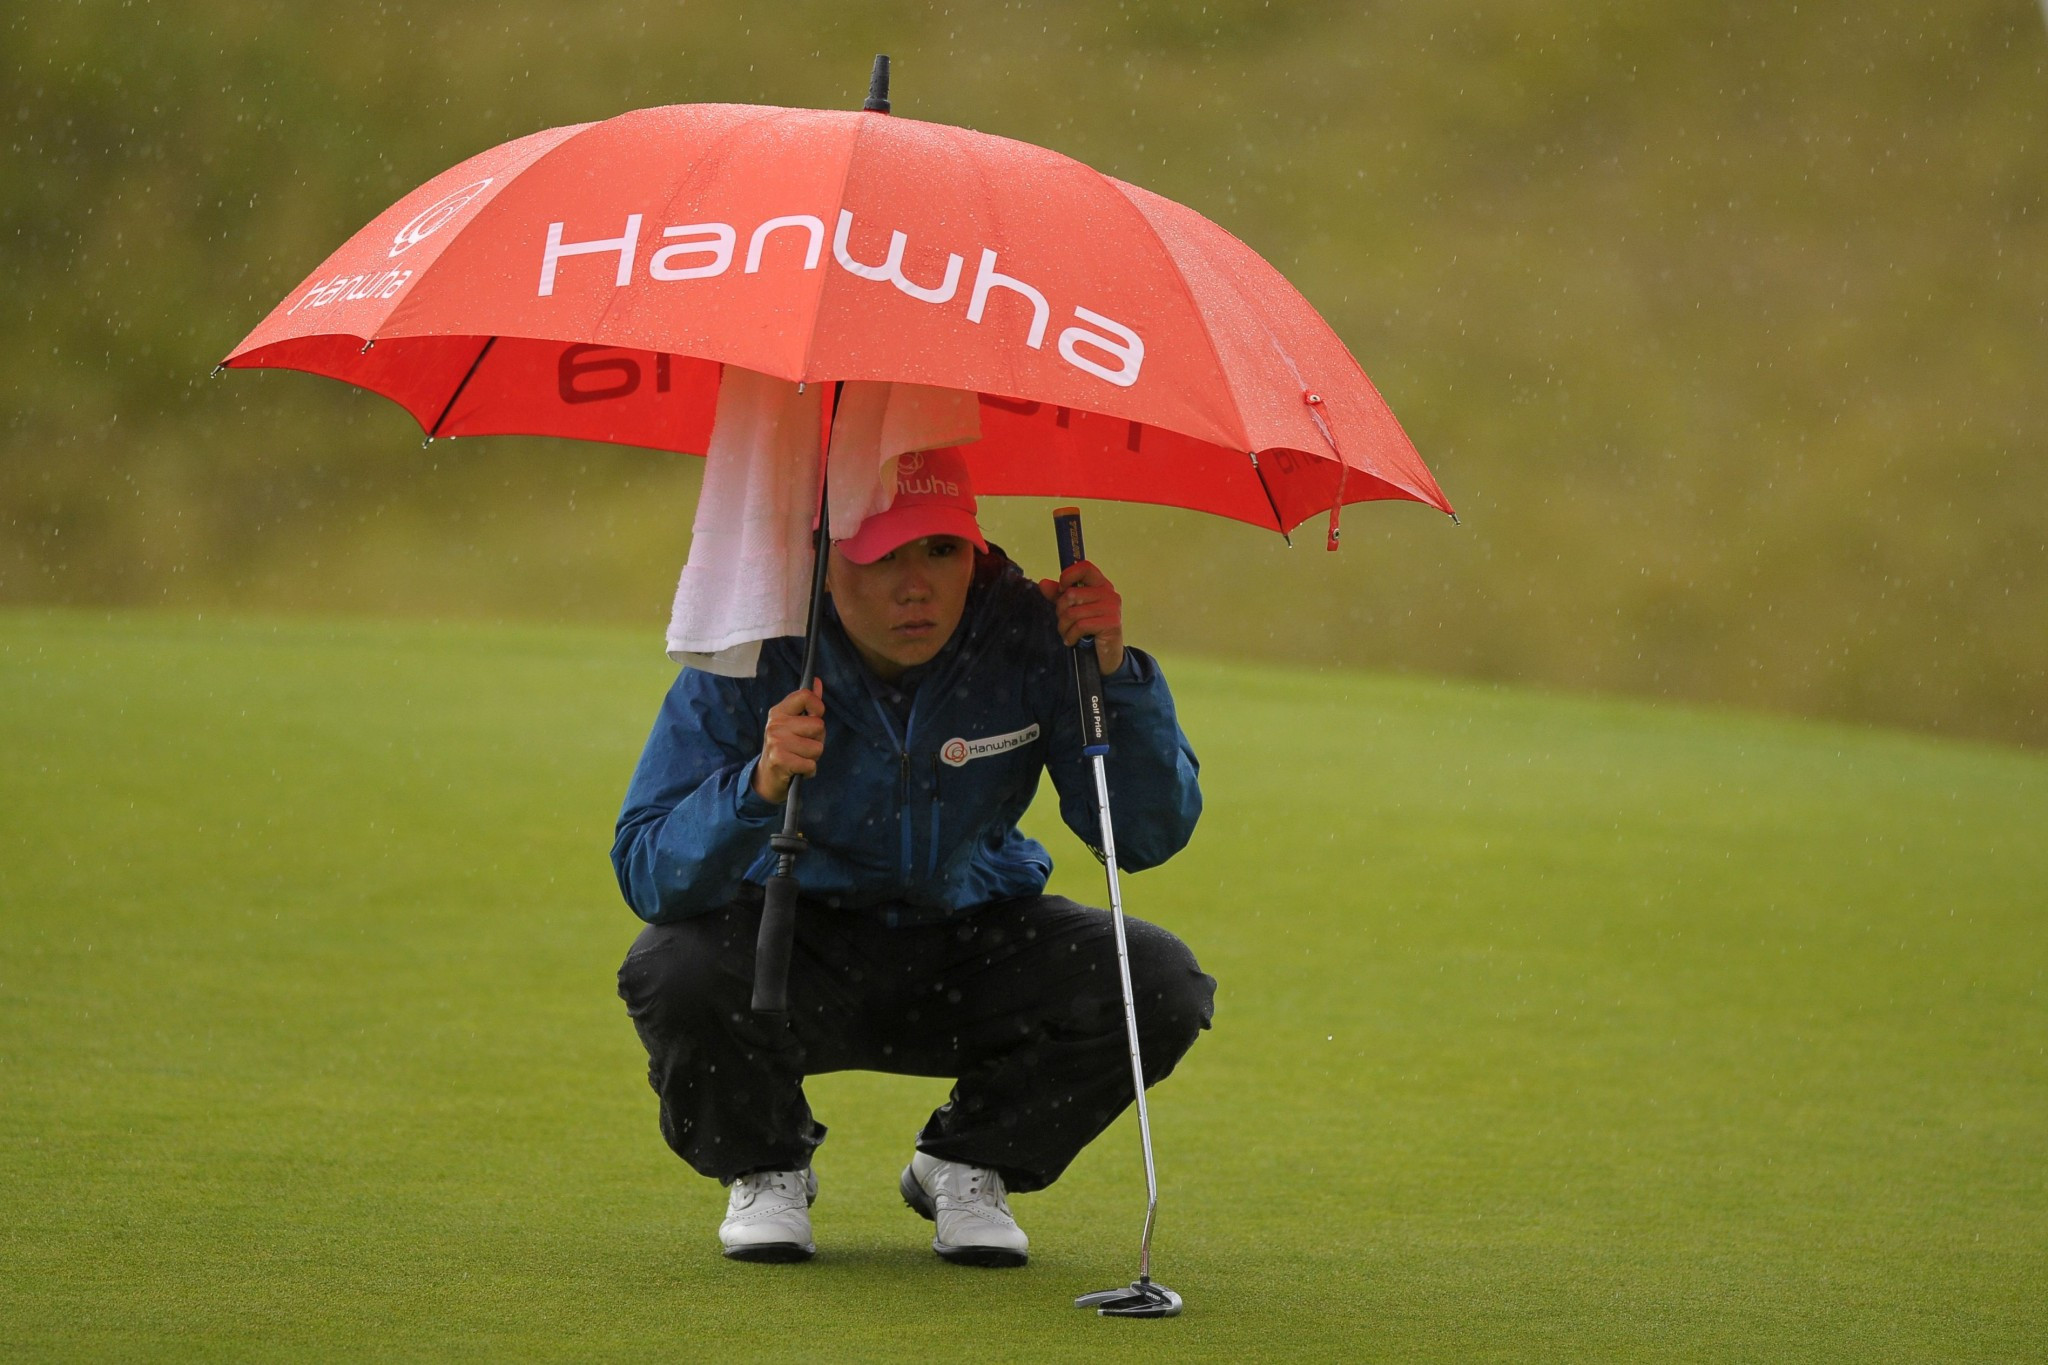 Kim takes charge at Women's British Open